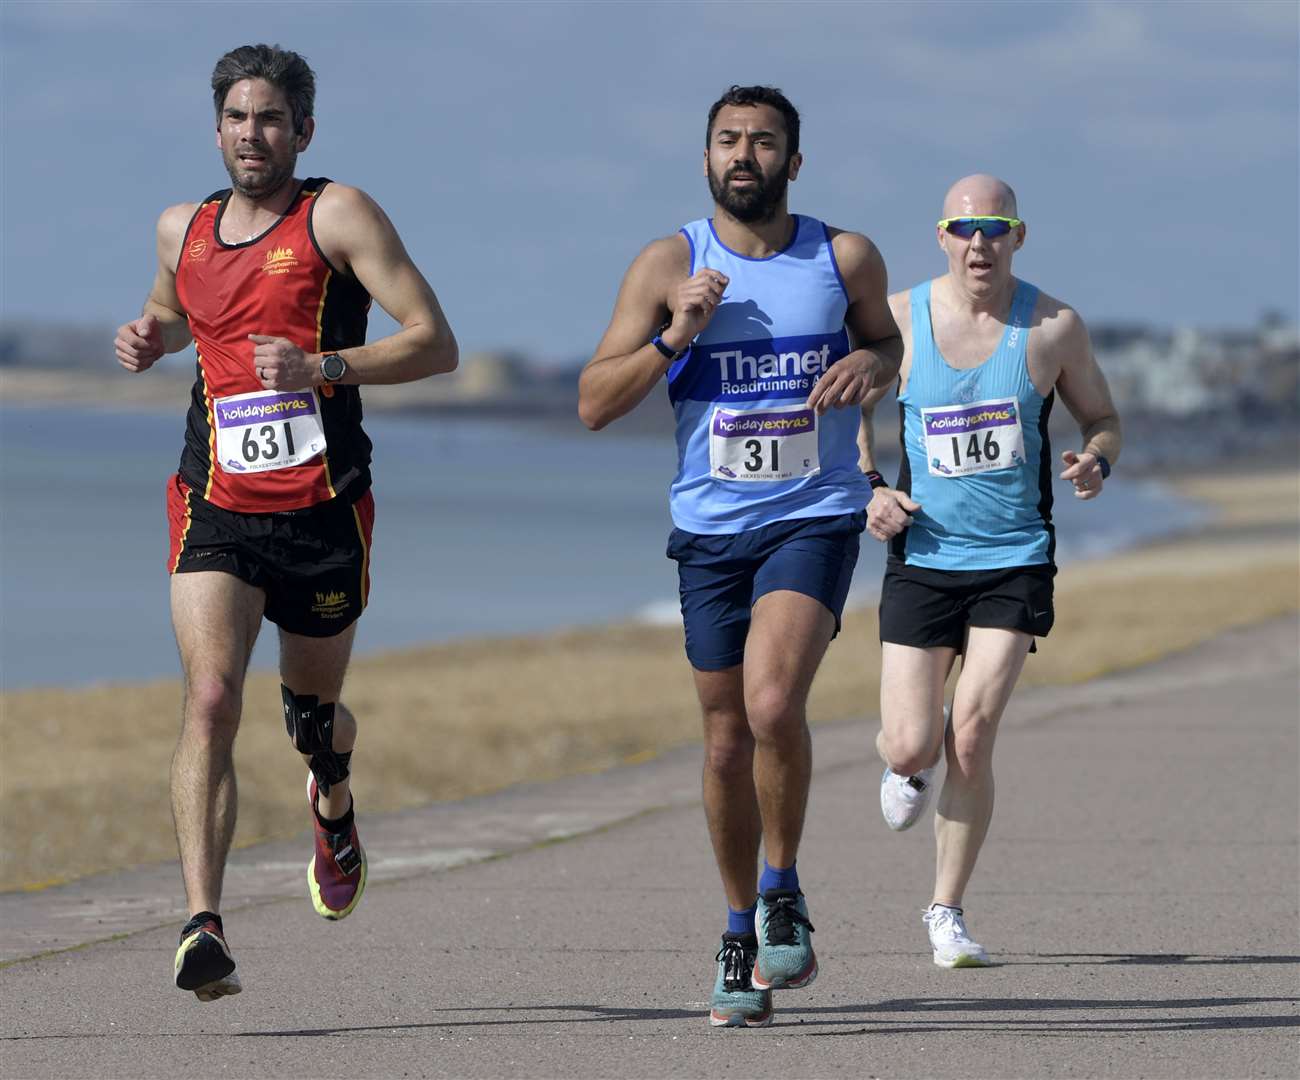 No. 631.Scott Simpson of Sittingbourne Striders, No.31 Jay Bailey of Thanet Roadrunners AC, No.146 Paul Crisp of Ashford & District Road Running Club. Picture: Barry Goodwin (63469099)